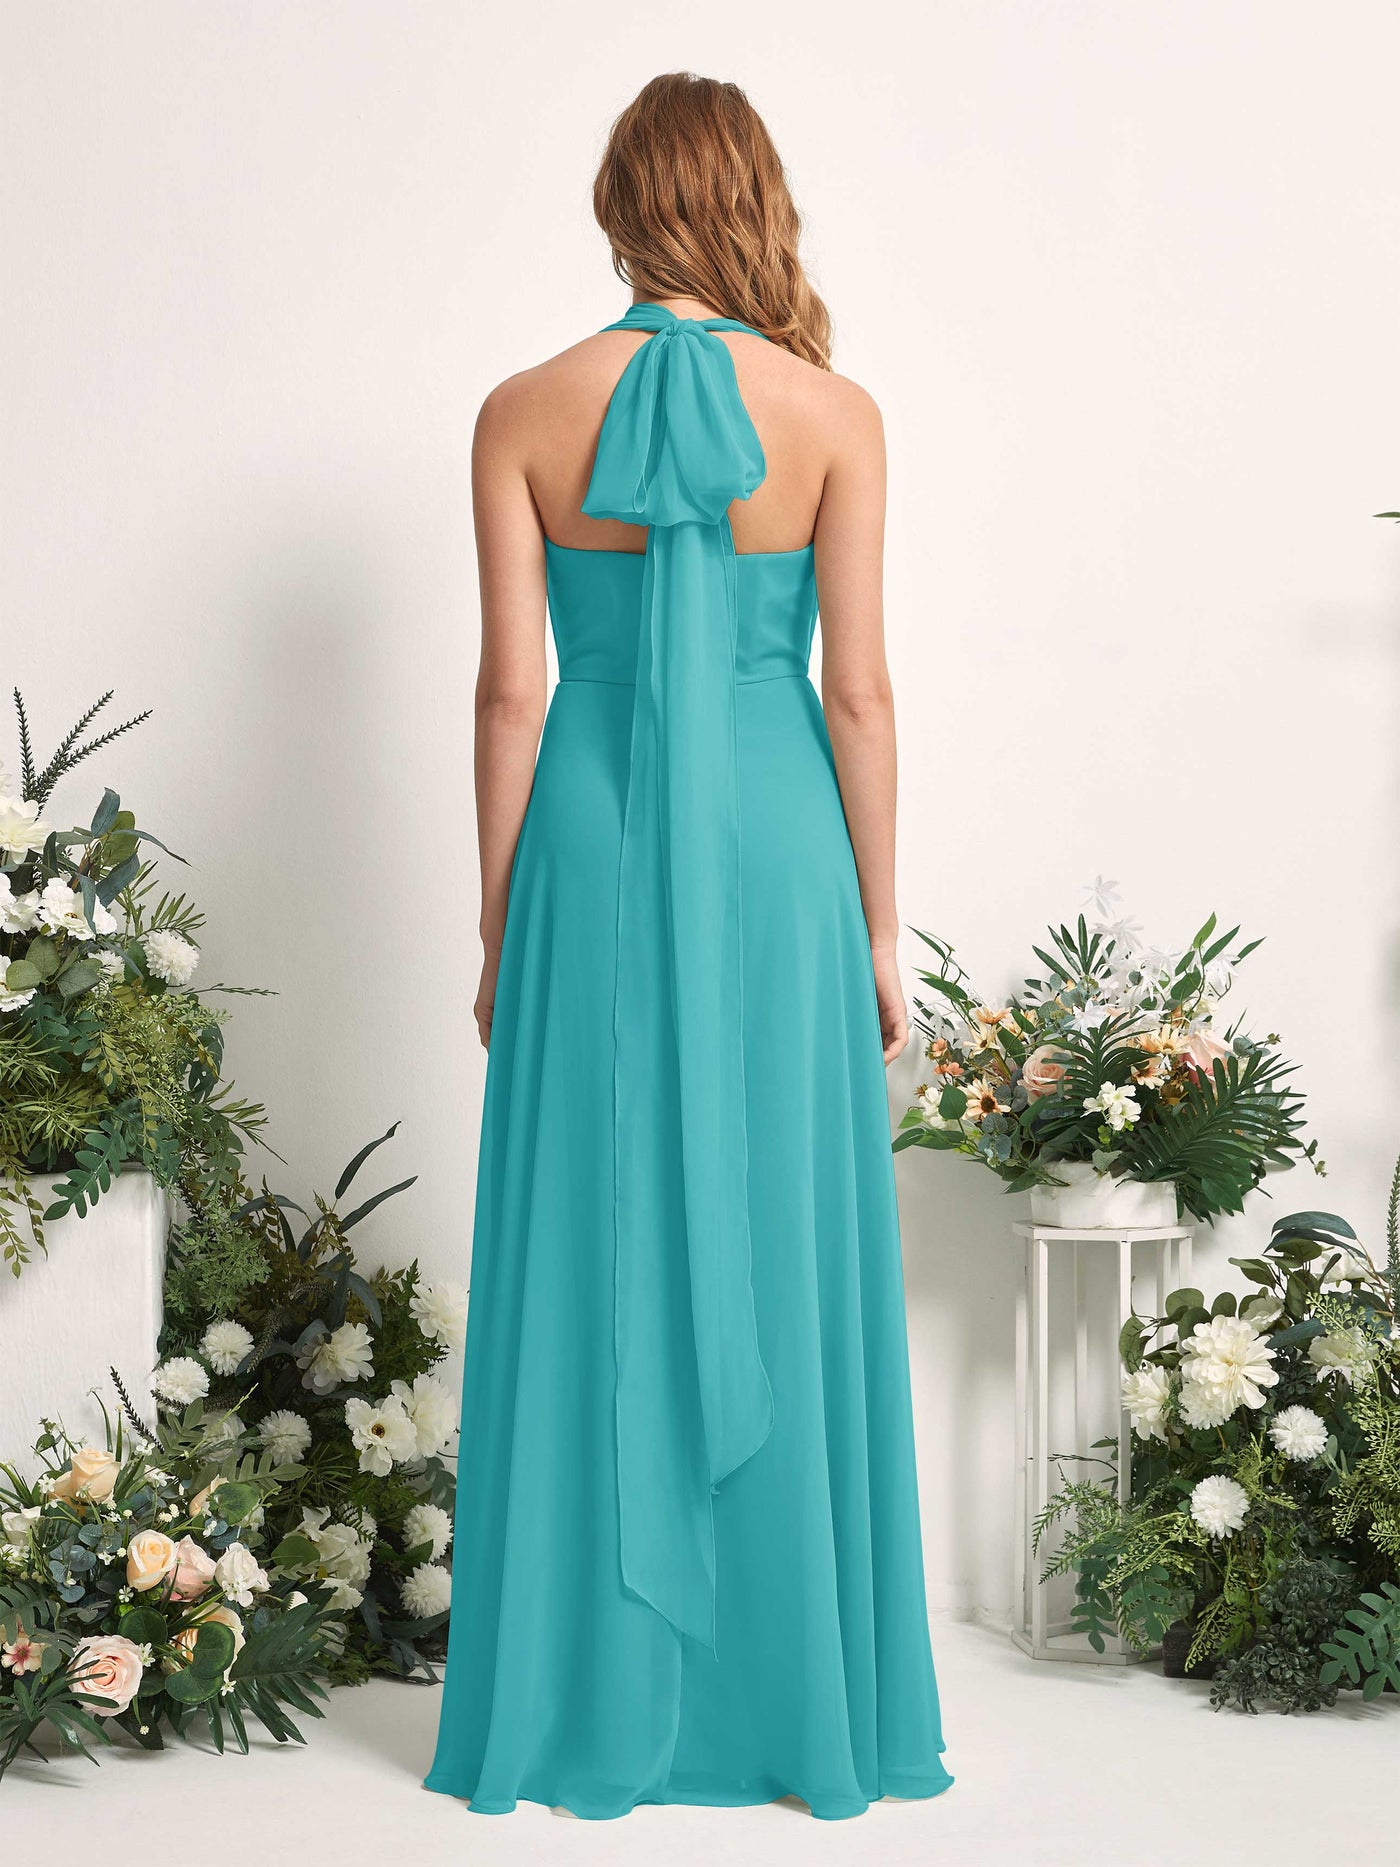 Bridesmaid Dress A-line Chiffon Halter Full Length Short Sleeves Wedding Party Dress - Turquoise (81226323)#color_turquoise